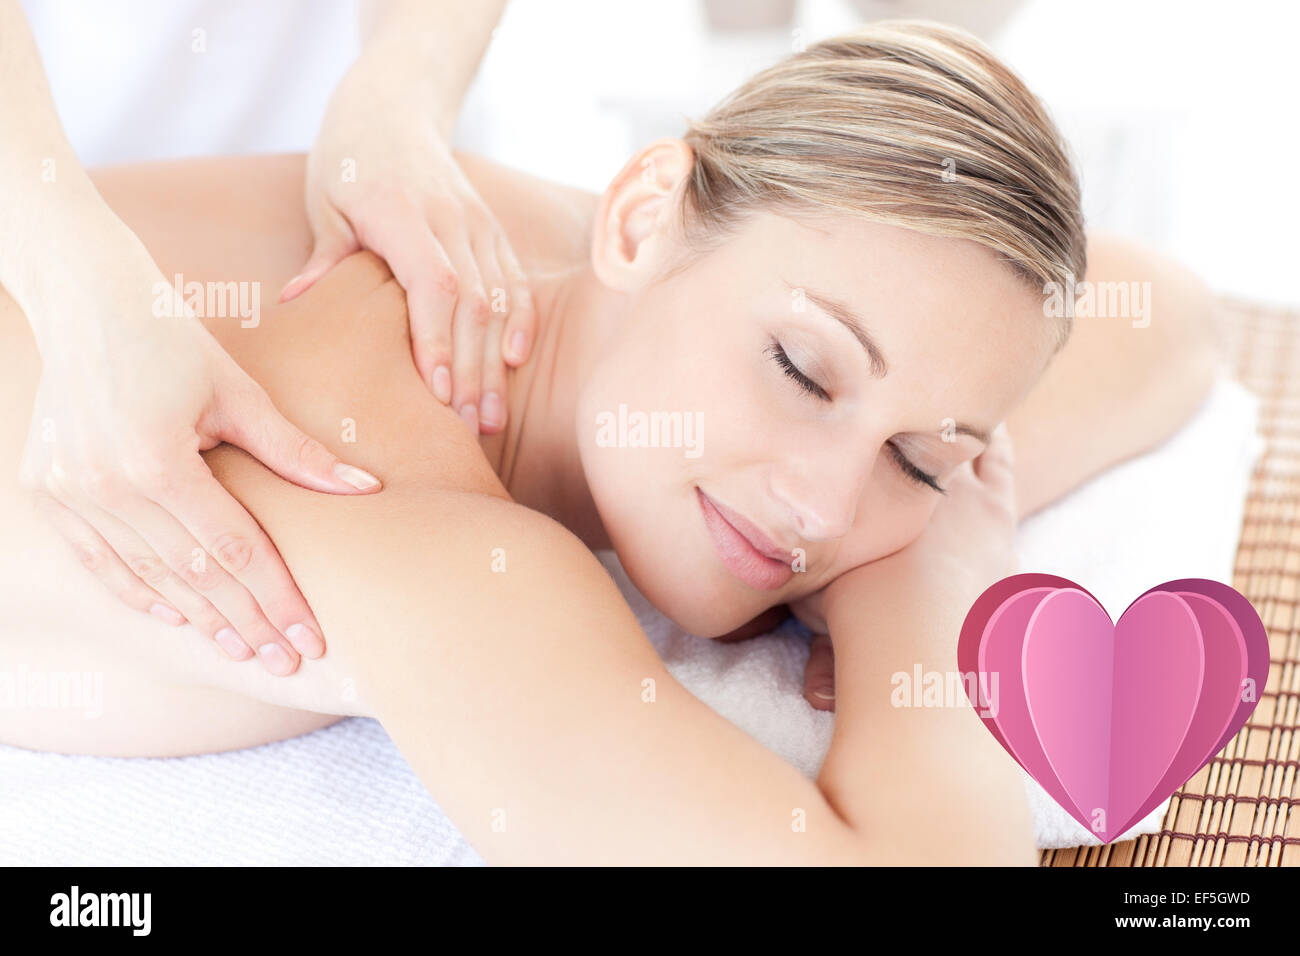 Composite image of beautiful woman receiving a back massage Stock Photo